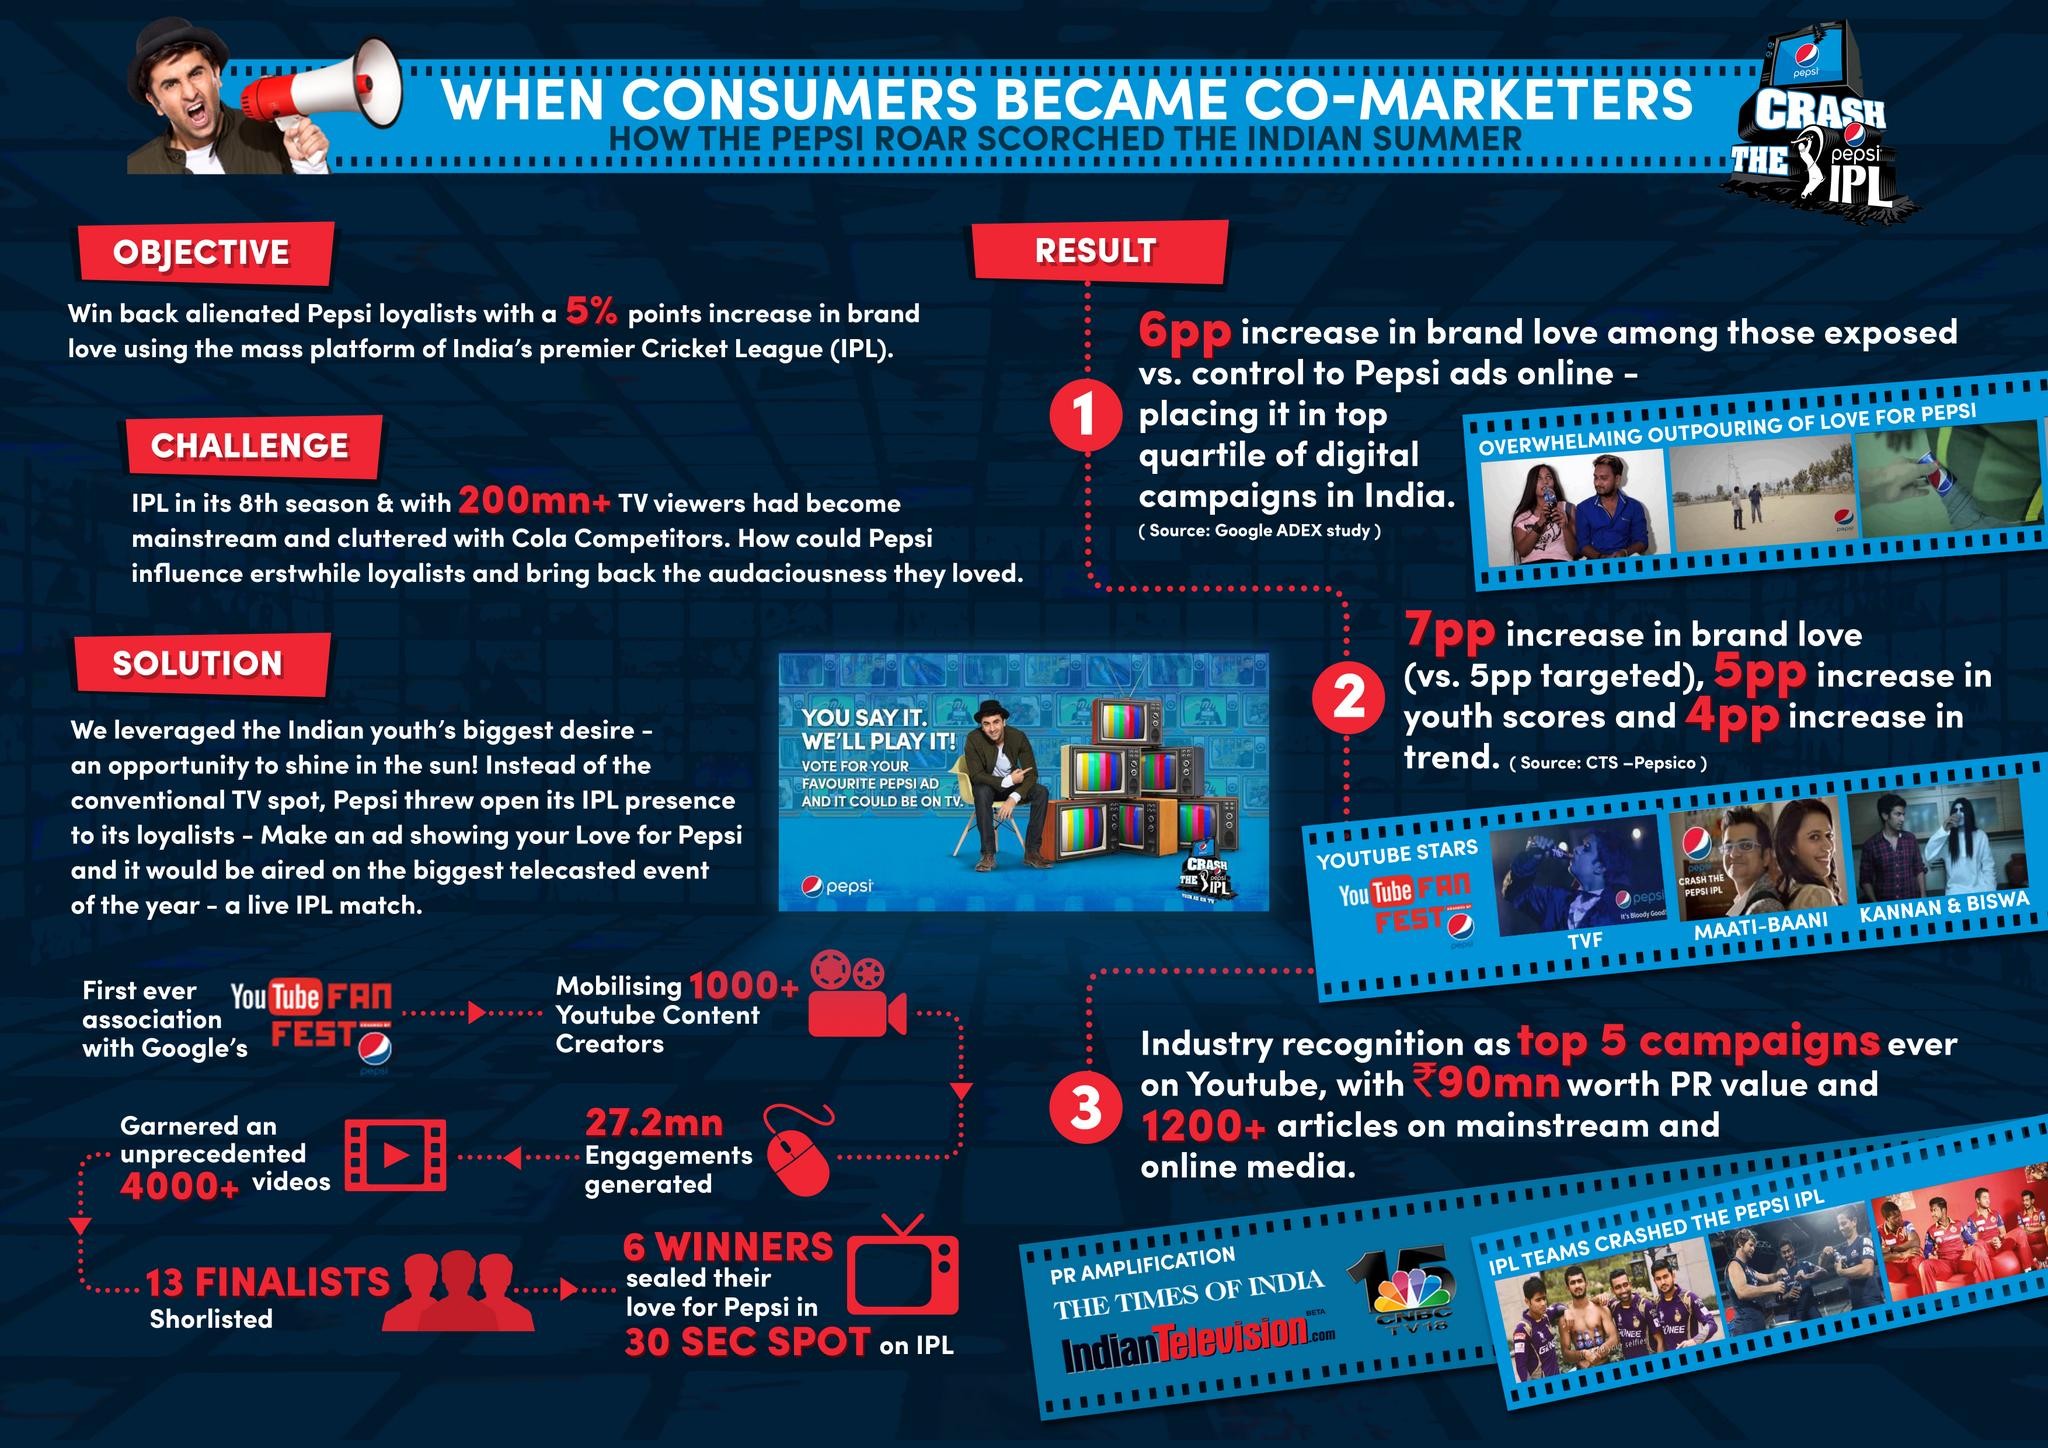 When consumers became co-marketers! How the Pepsi roar scorched the Indian summe